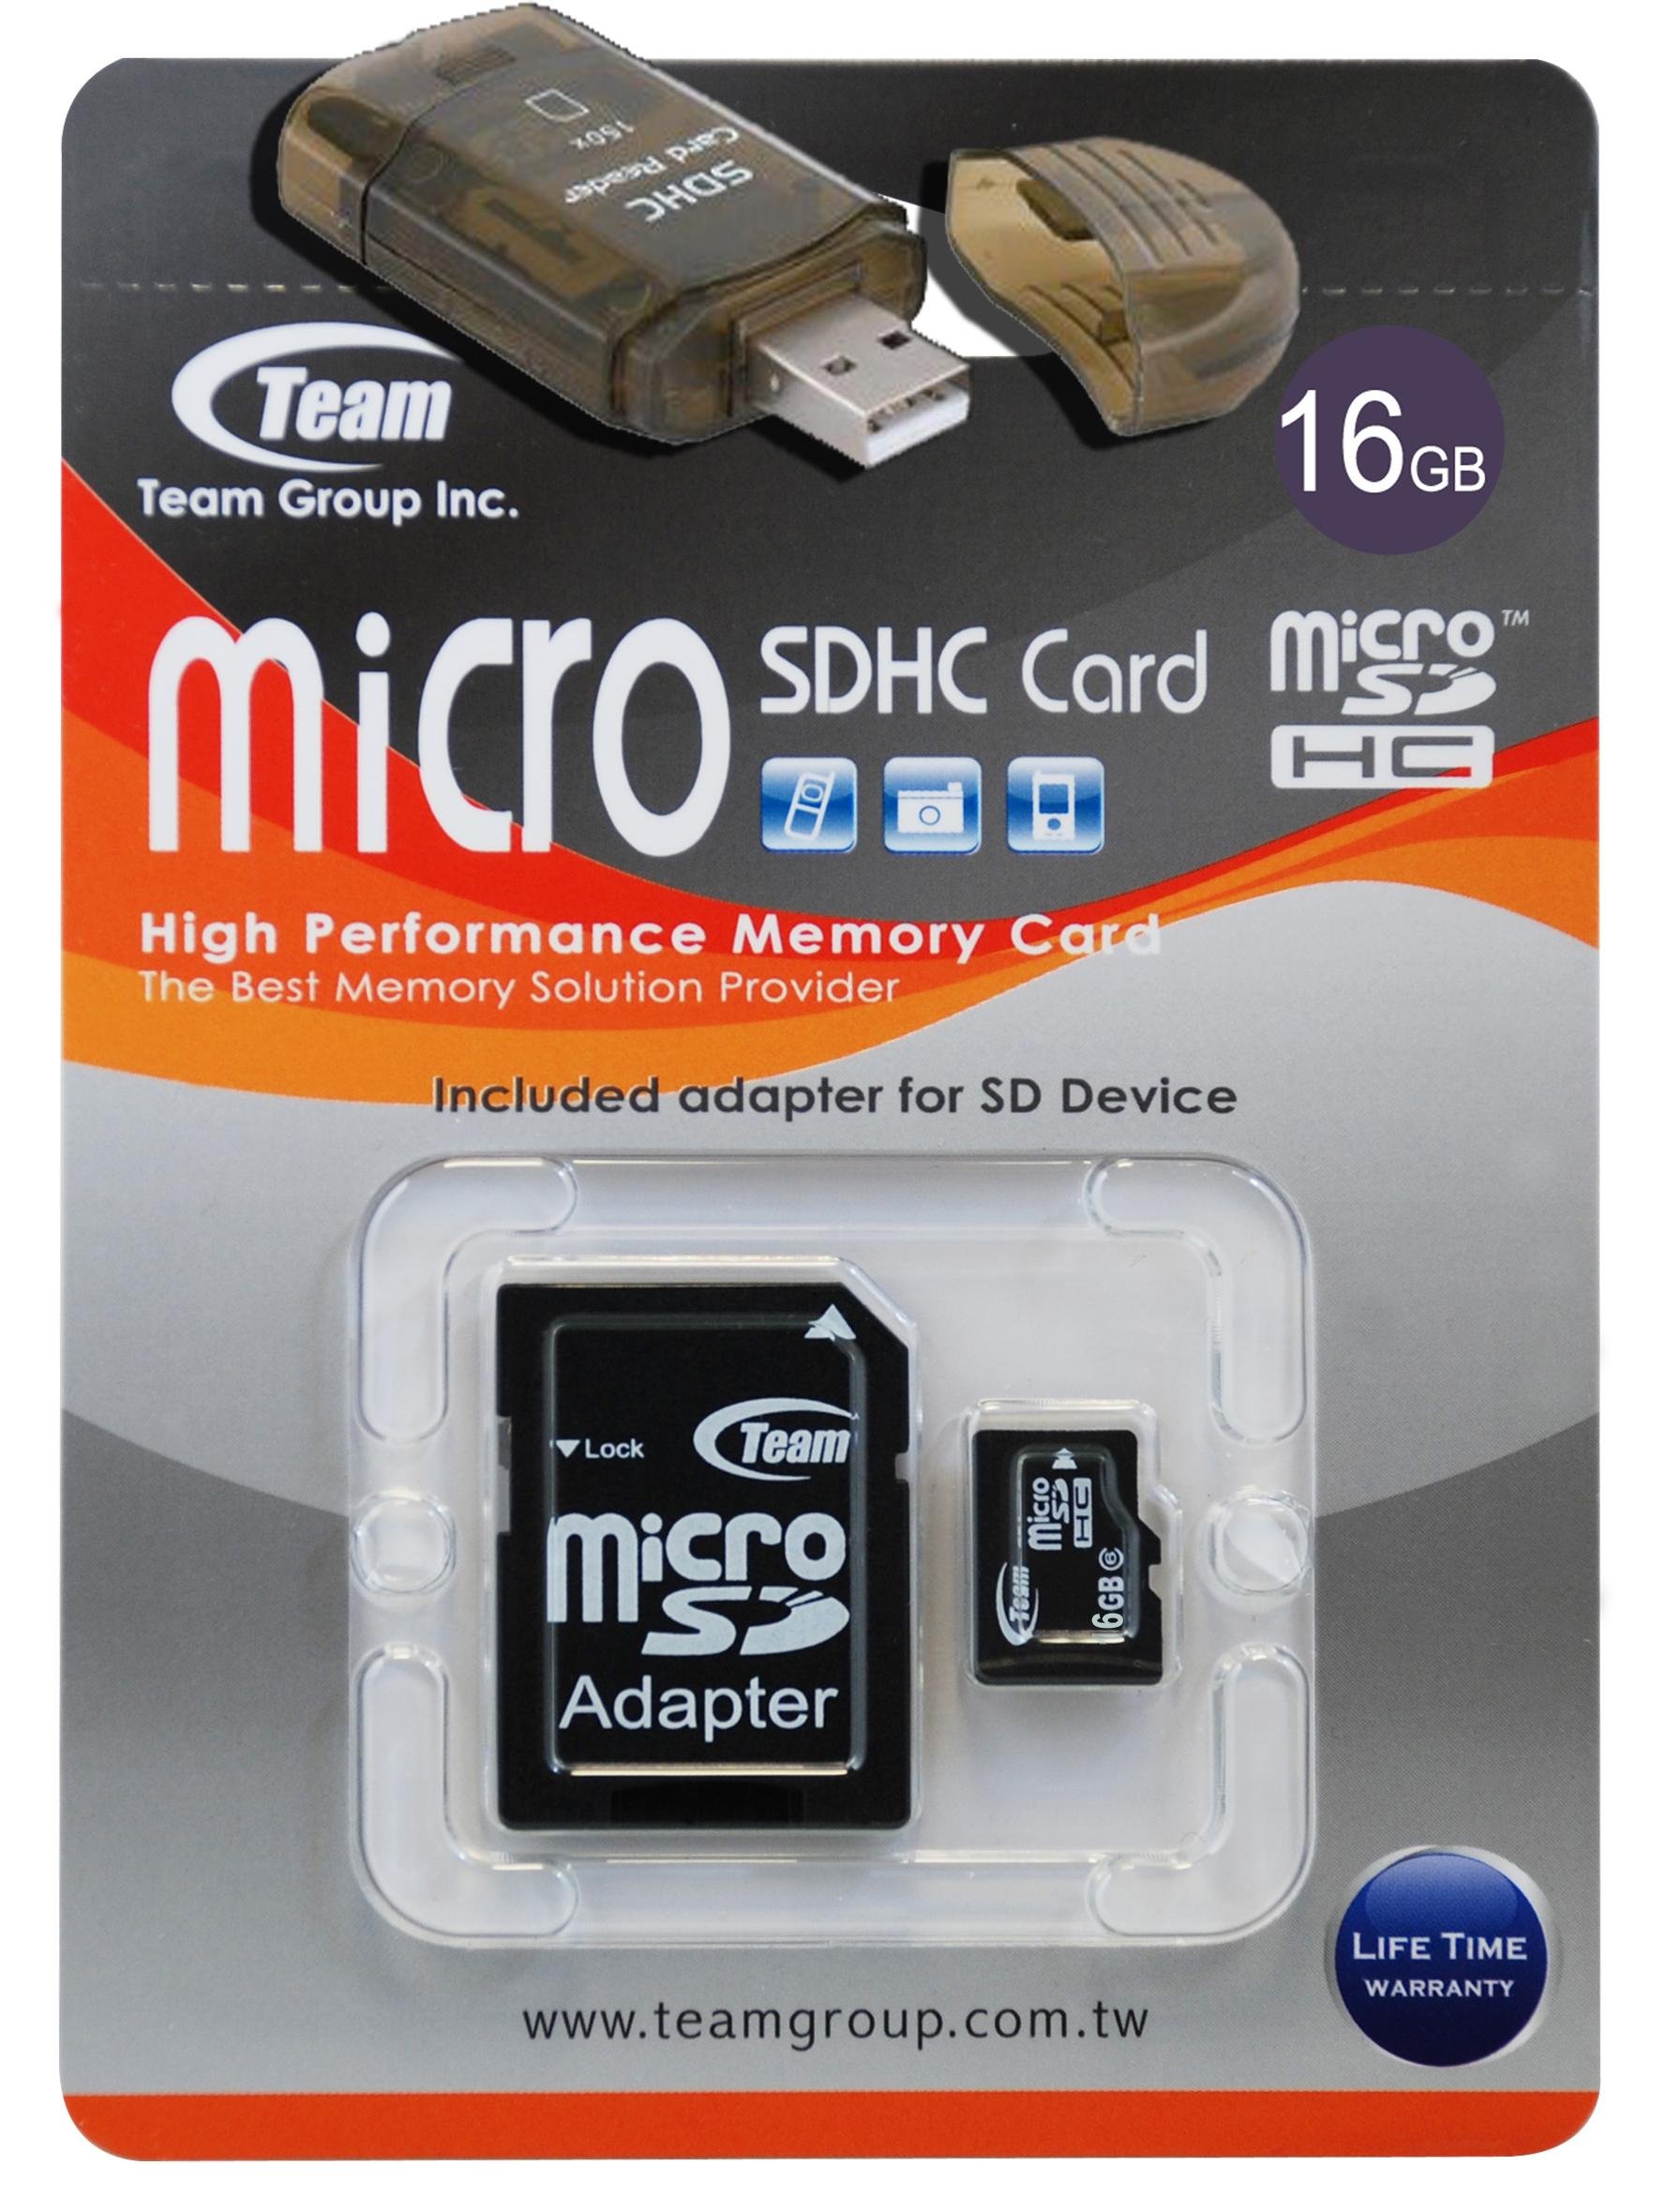 16GB Turbo Speed Class 6 MicroSDHC Memory Card For SAMSUNG INTENSITY II U450. High Speed Card Comes with a free SD and USB Ad